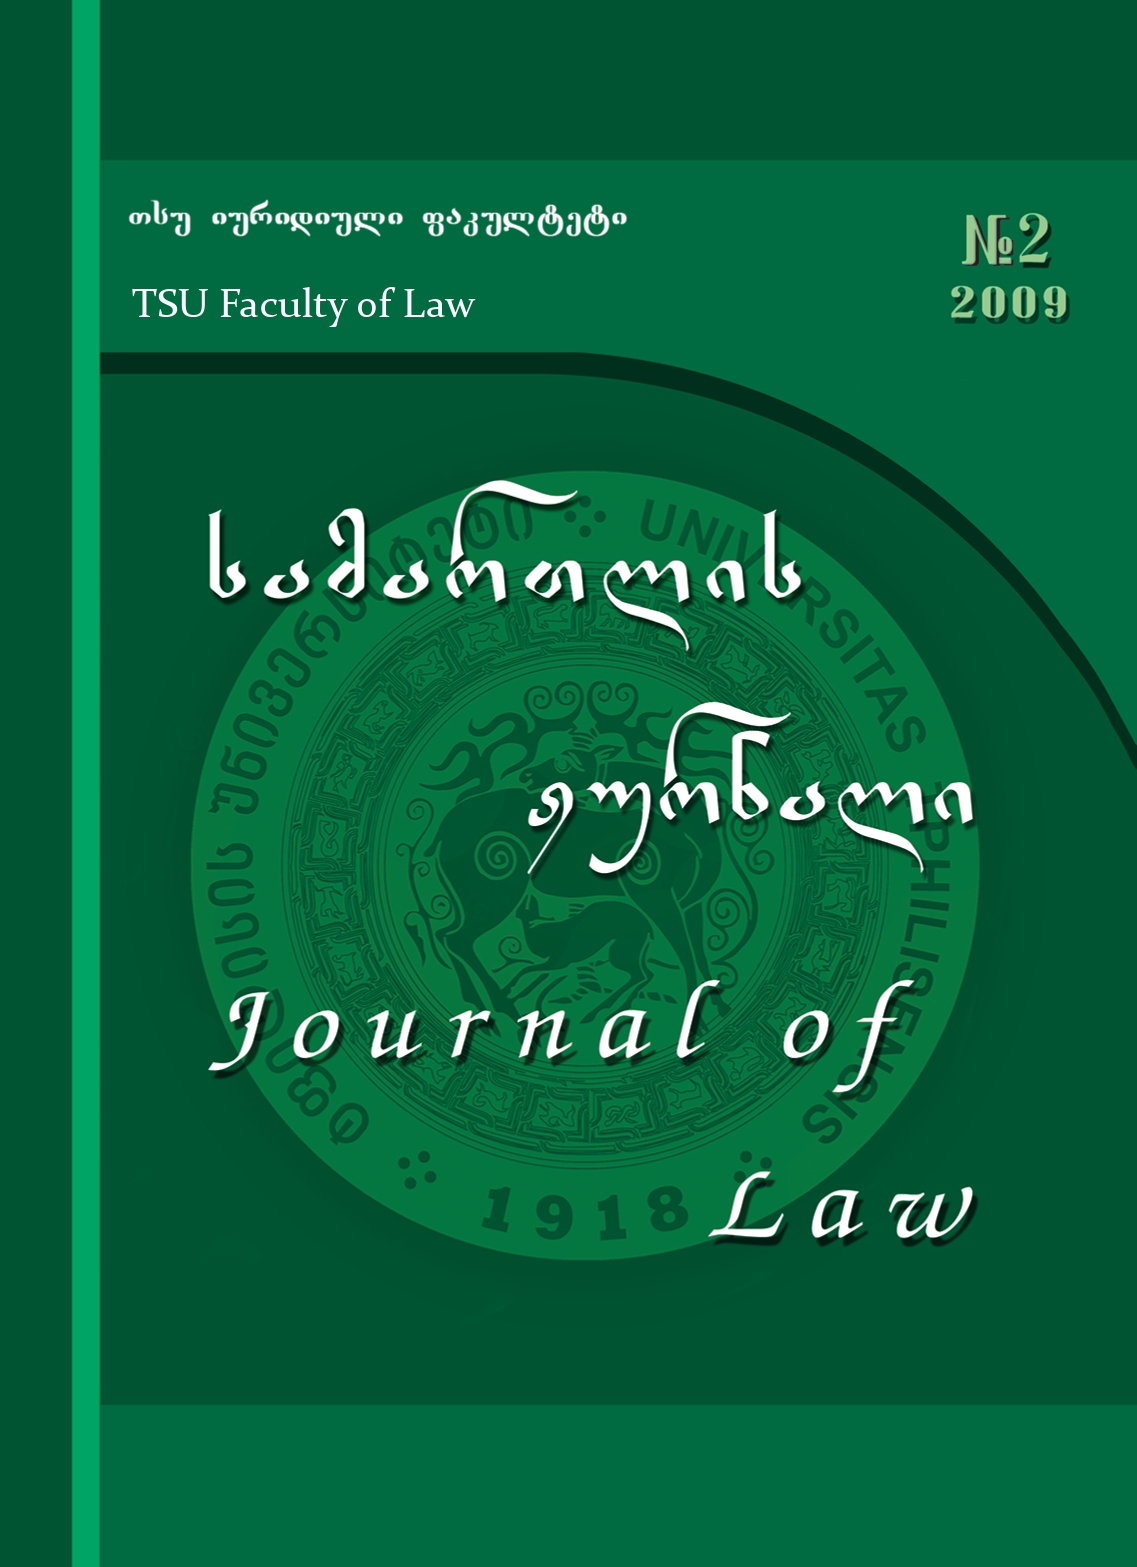 					View No. 2 (2009):  Journal of Law
				